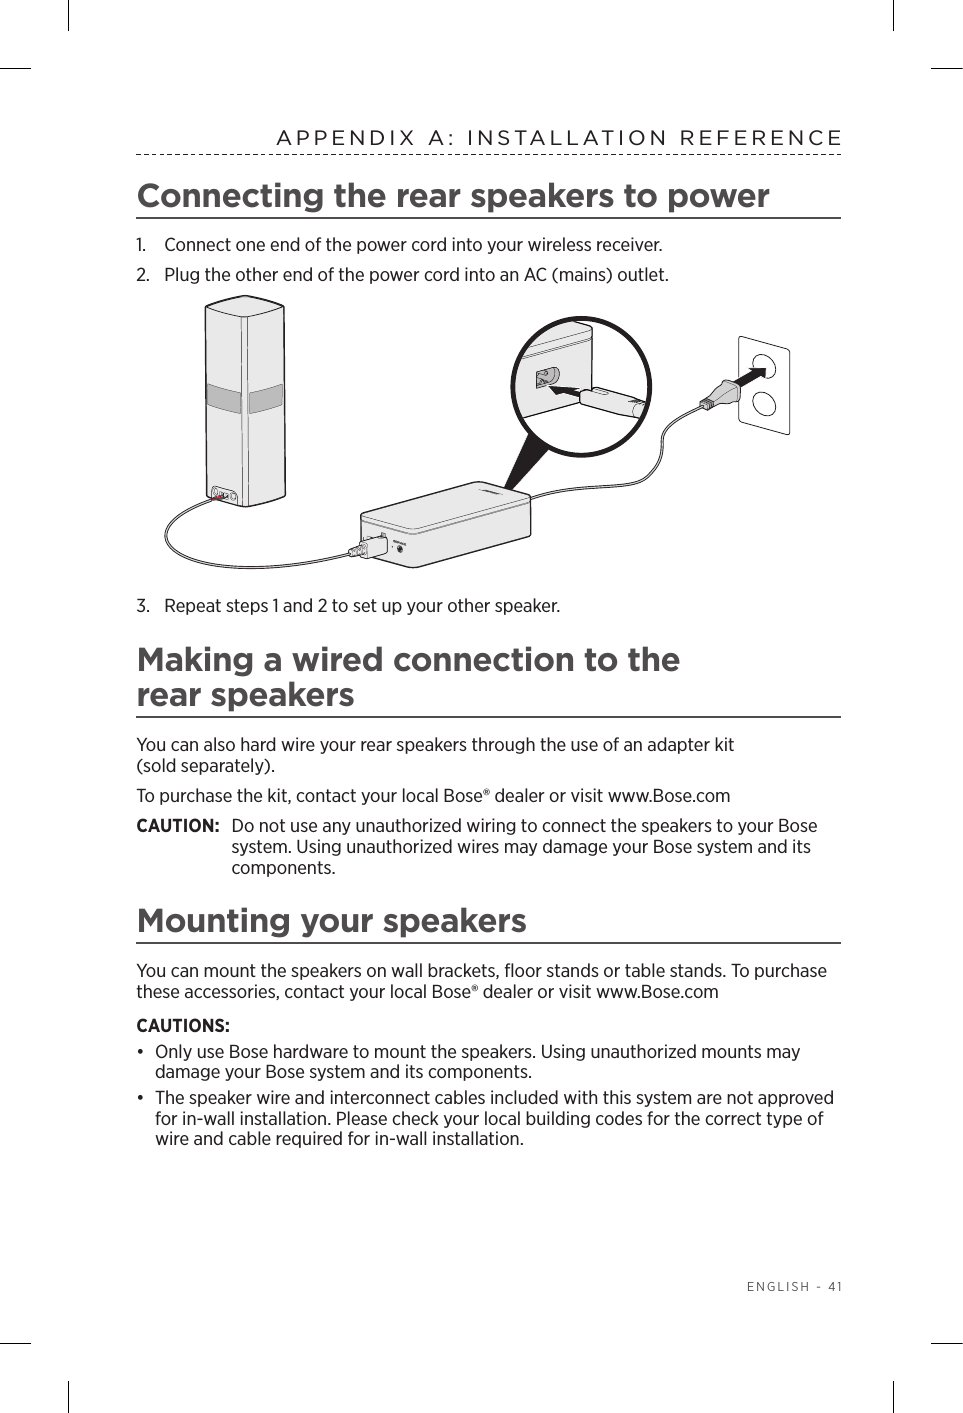  ENGLISH - 41APPENDIX A: INSTALLATION REFERENCEConnecting the rear speakers to power1.  Connect one end of the power cord into your wireless receiver.2.  Plug the other end of the power cord into an AC (mains) outlet.3.  Repeat steps 1 and 2 to set up your other speaker.Making a wired connection to the  rear speakersYou can also hard wire your rear speakers through the use of an adapter kit  (sold separately).To purchase the kit, contact your local Bose® dealer or visit www.Bose.comCAUTION:   Do not use any unauthorized wiring to connect the speakers to your Bose system. Using unauthorized wires may damage your Bose system and its components.Mounting your speakersYou can mount the speakers on wall brackets, ﬂoor stands or table stands. To purchase these accessories, contact your local Bose® dealer or visit www.Bose.comCAUTIONS: •  Only use Bose hardware to mount the speakers. Using unauthorized mounts may  damage your Bose system and its components.•  The speaker wire and interconnect cables included with this system are not approved for in-wall installation. Please check your local building codes for the correct type of wire and cable required for in-wall installation.